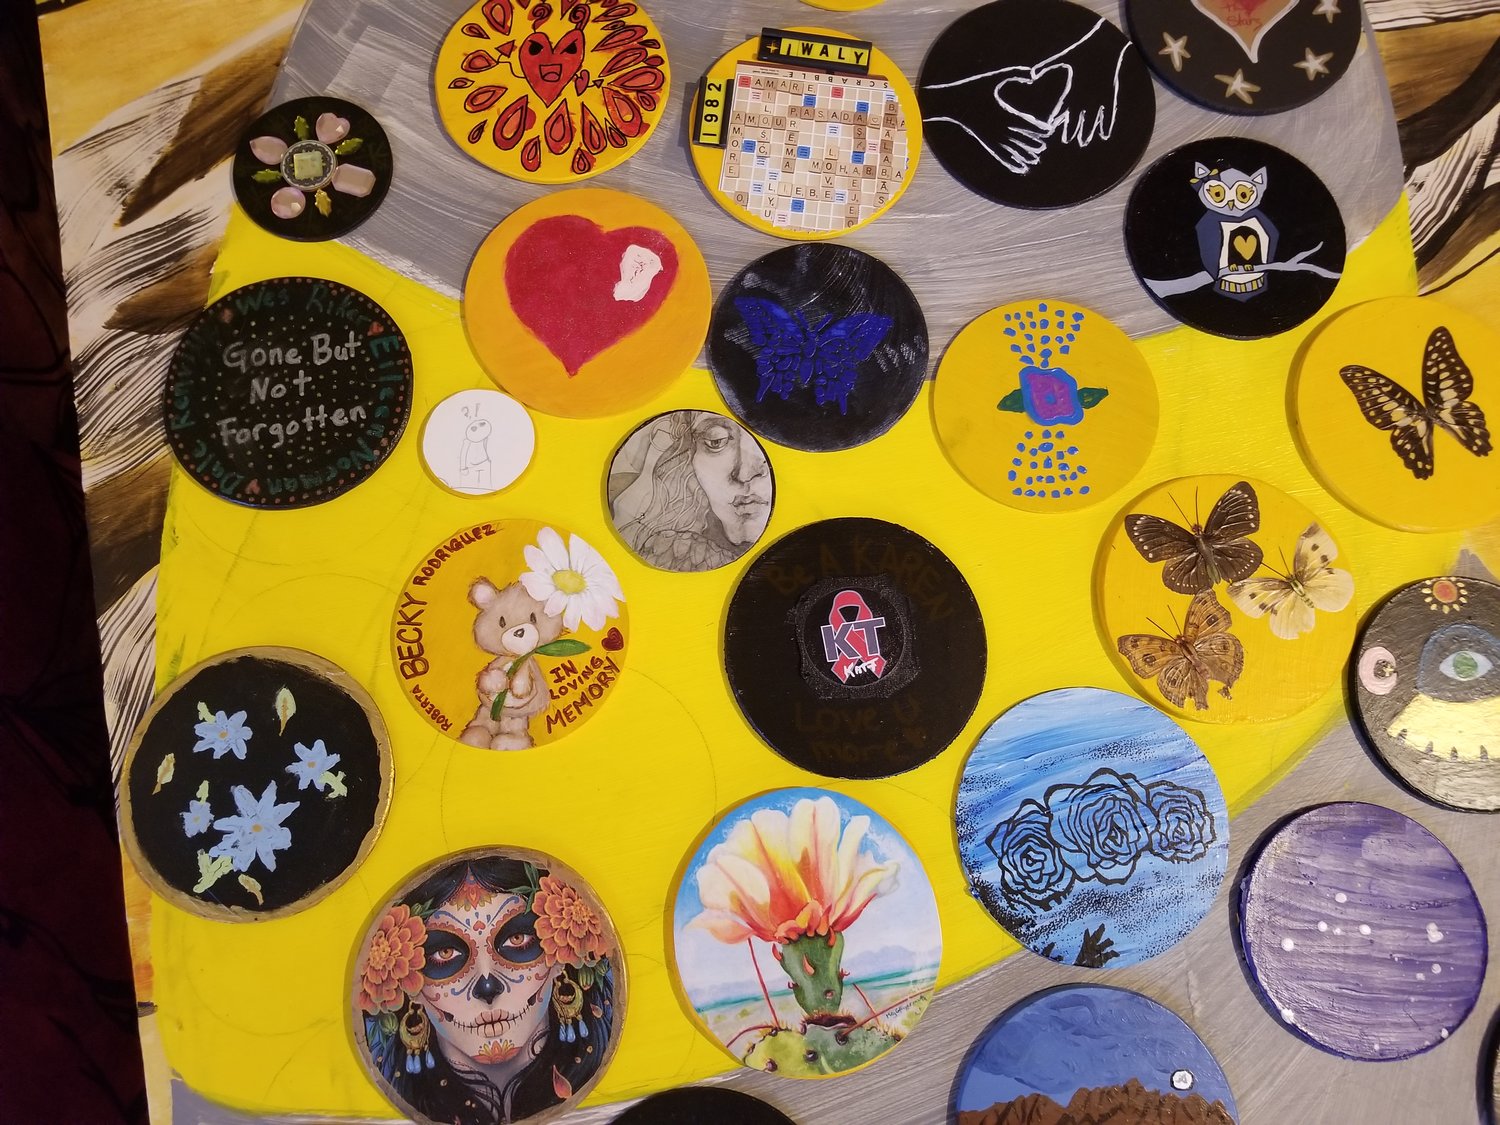 Closeup of some of the “disc art” that is part of Coy Lowther’s mural at the Las Cruces Museum of Art.